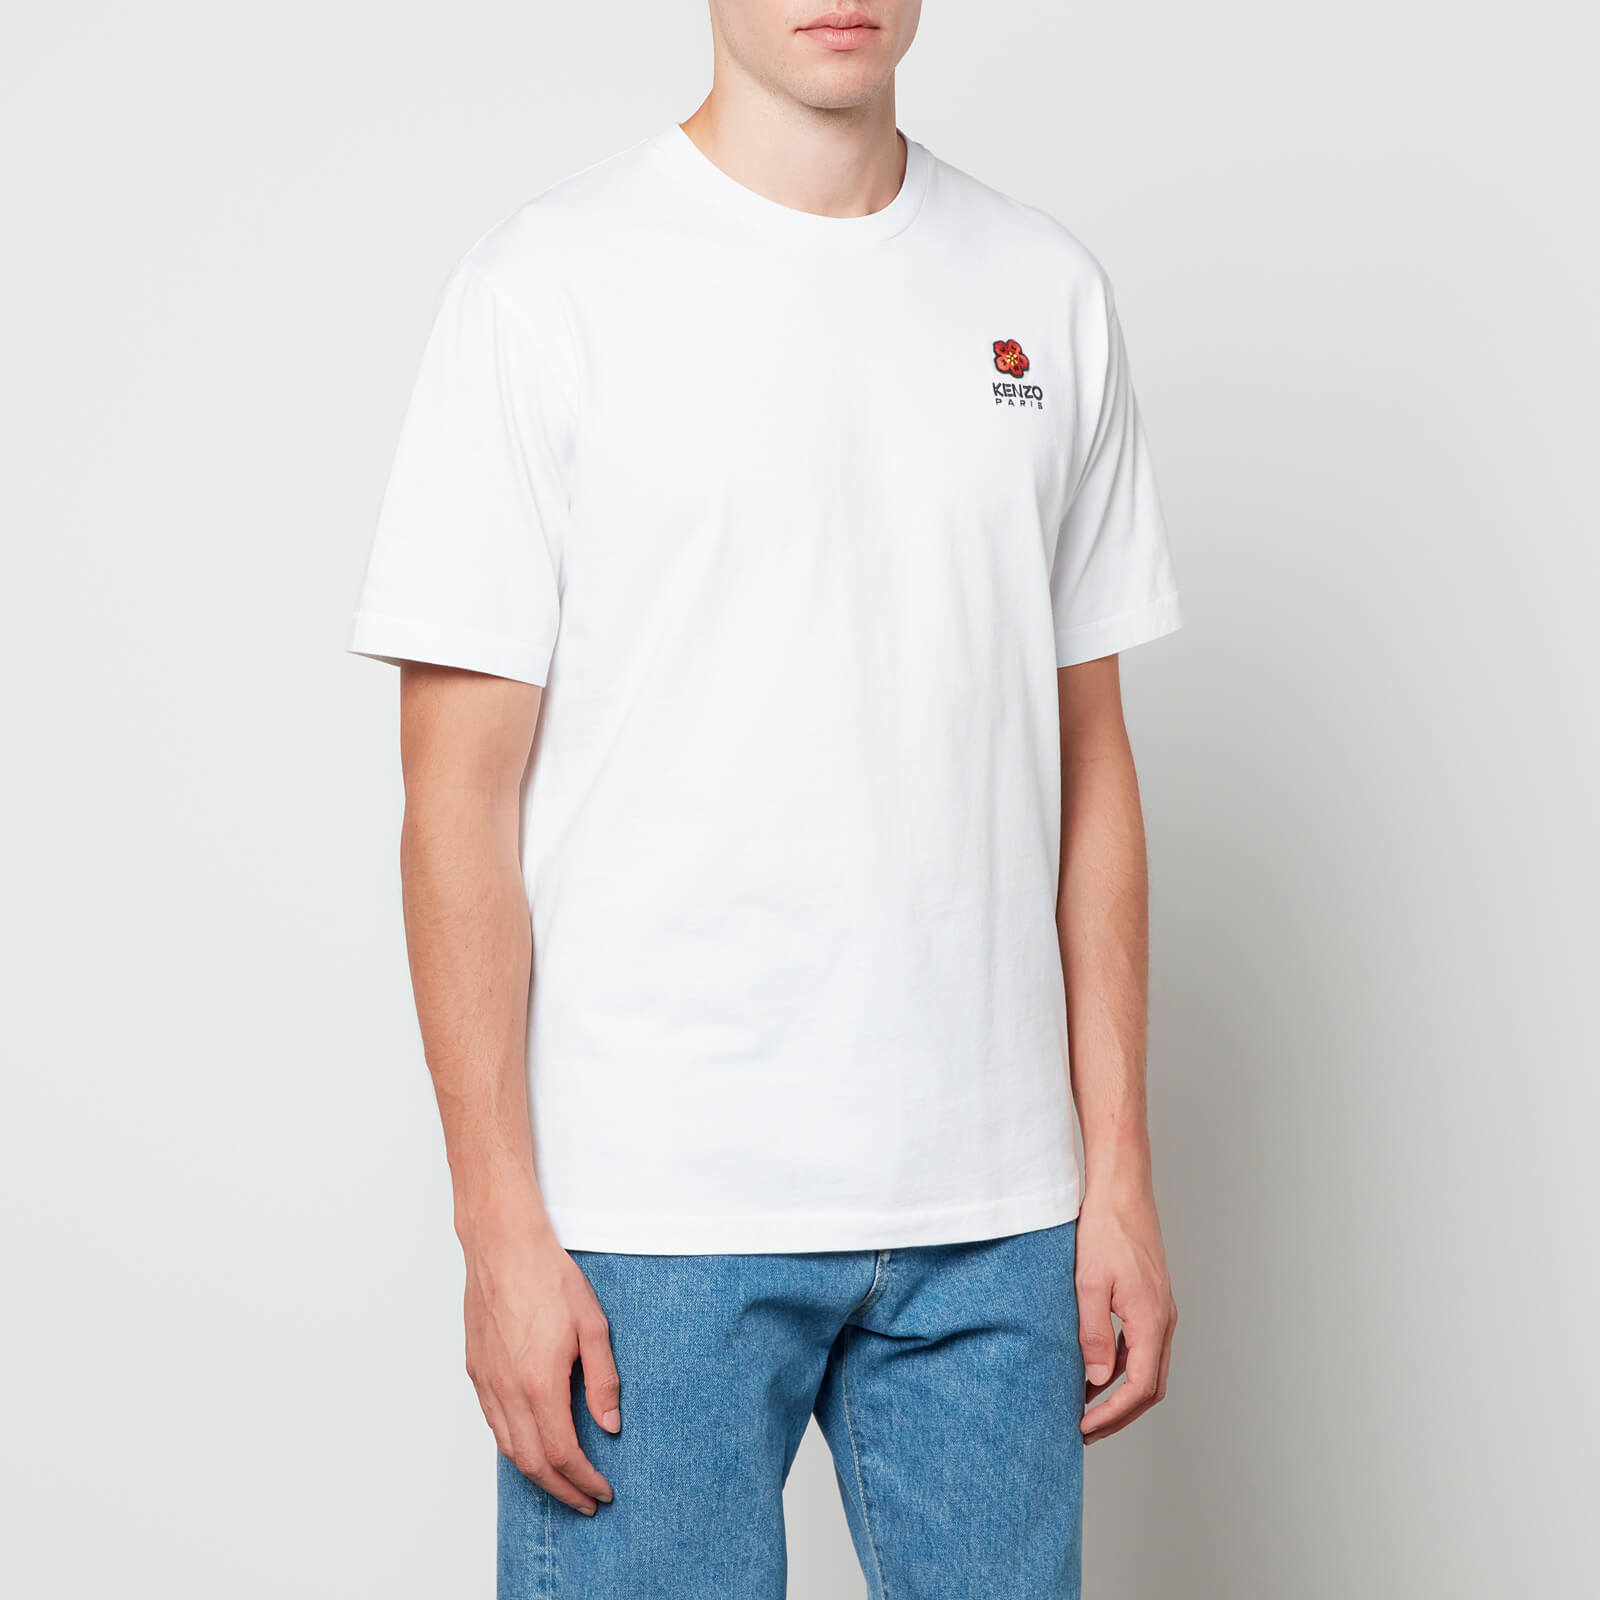 KENZO Crest Embroidered Cotton T-Shirt - XL